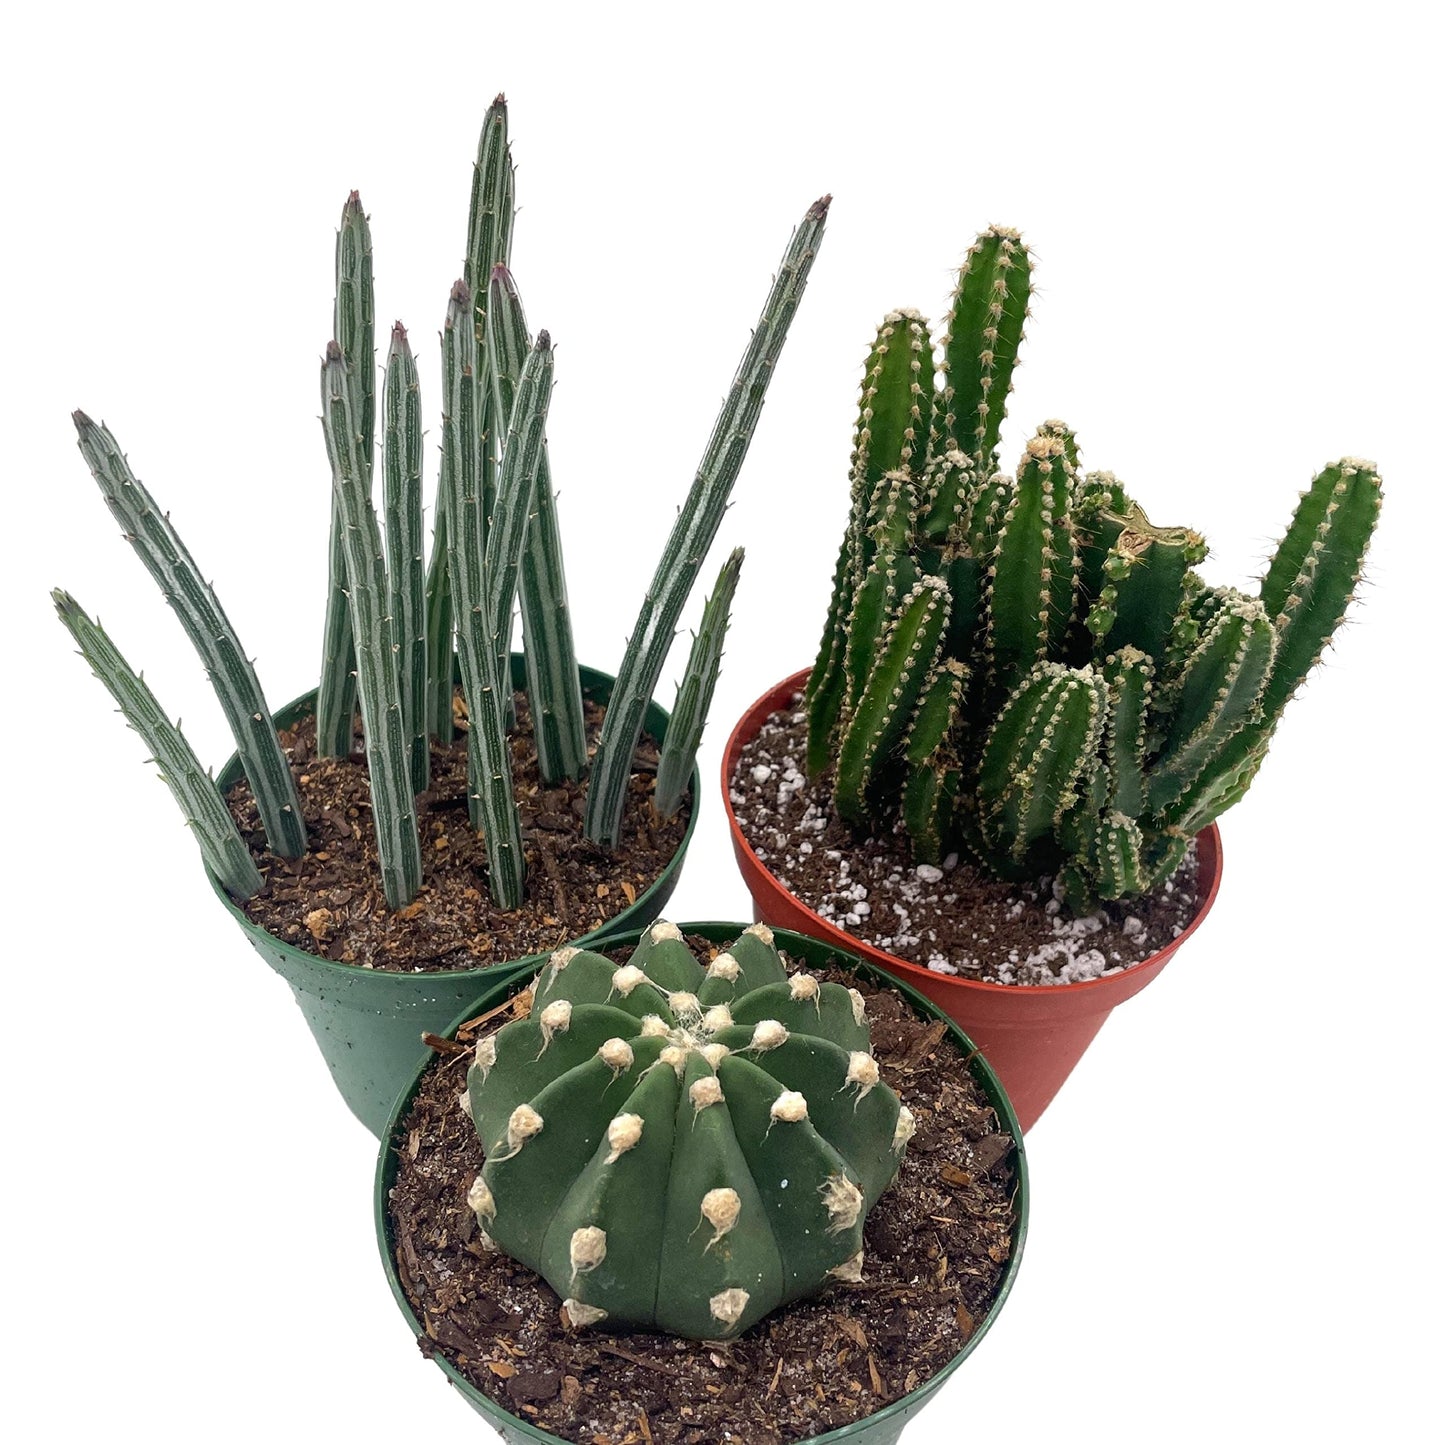 BubbleBlooms Cactus Assortment, 4 inch Set of 3, Best-Sellers Most Popular Cacti Variety